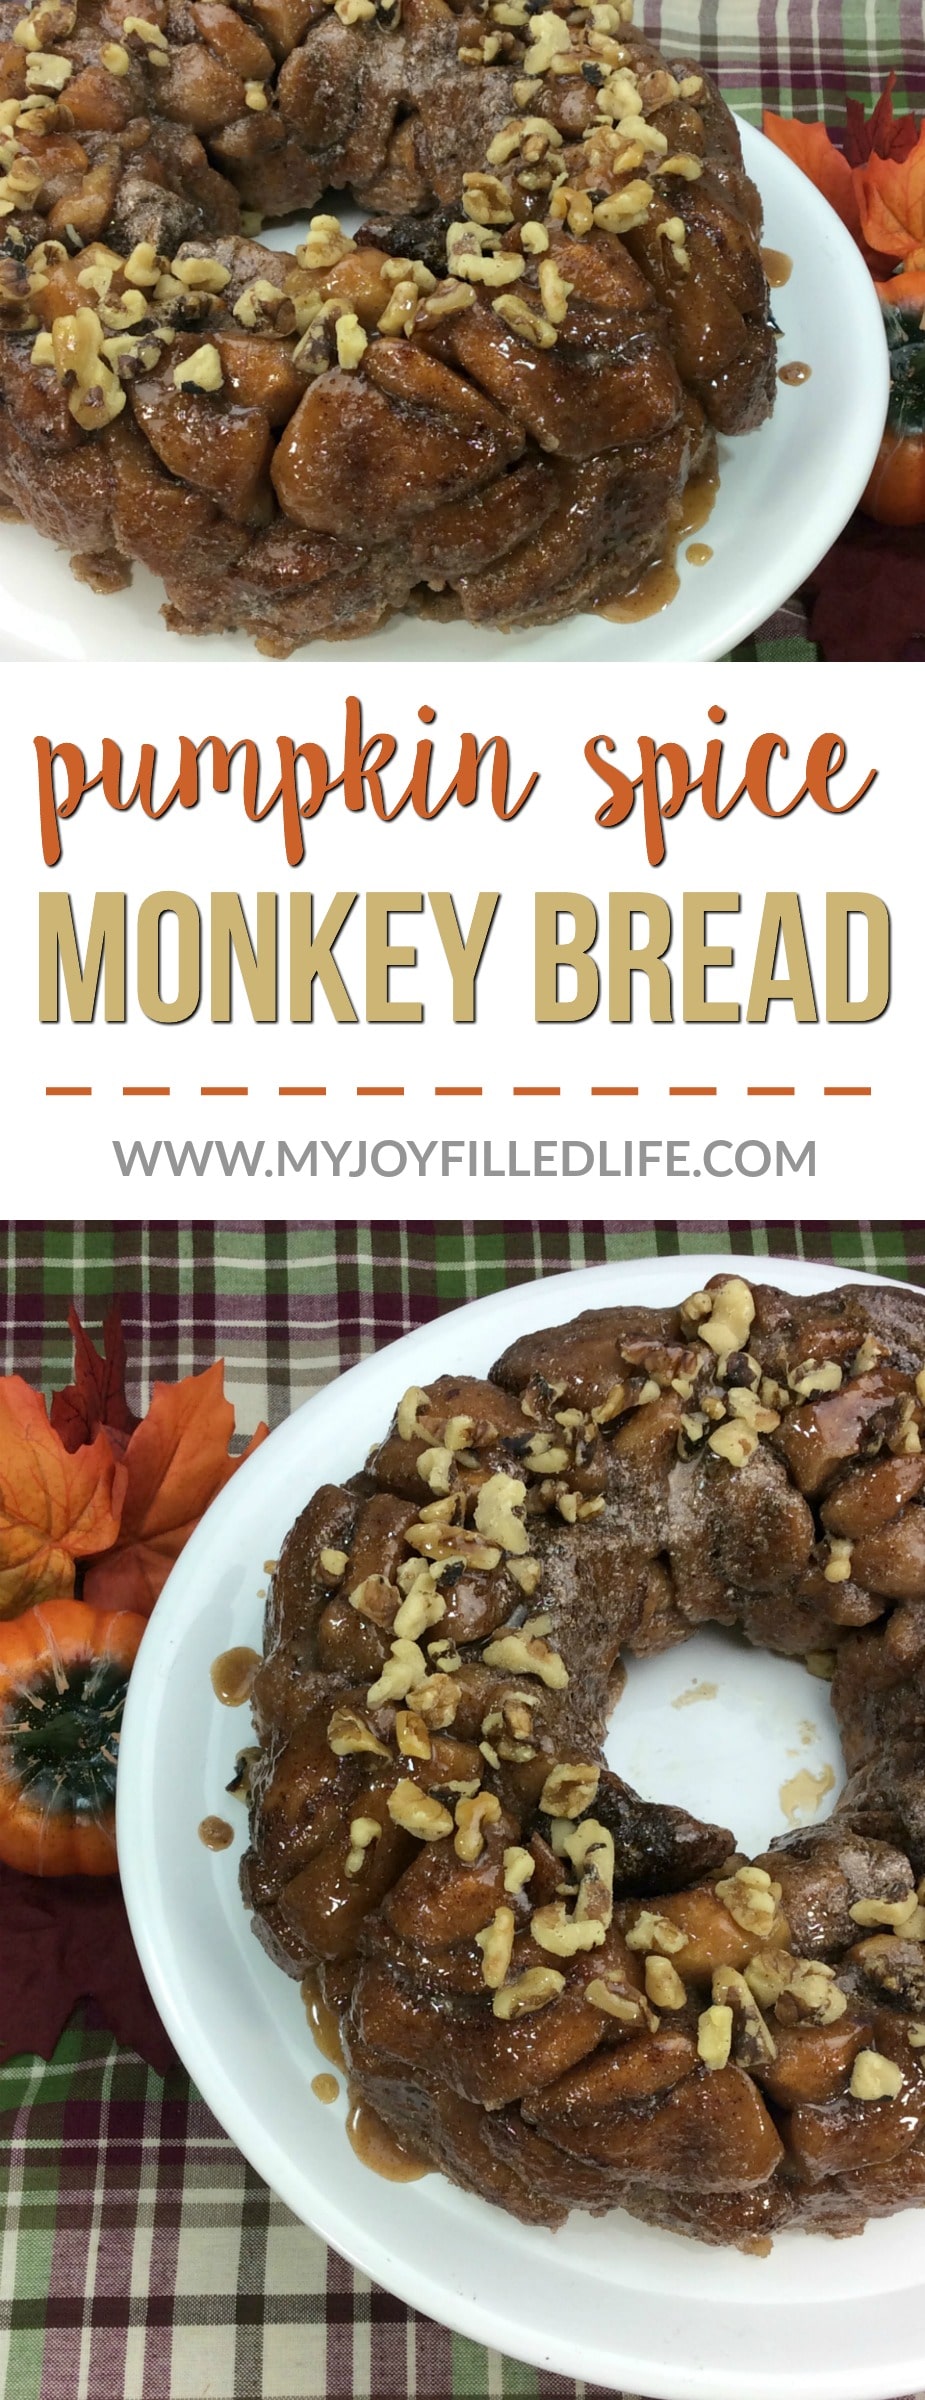 So easy to make and so delicious, this pumpkin caramel monkey bread will make the perfect addition to any fall get together or special occasion. #monkeybread #pumpkin #allthingspumpkin #brunch